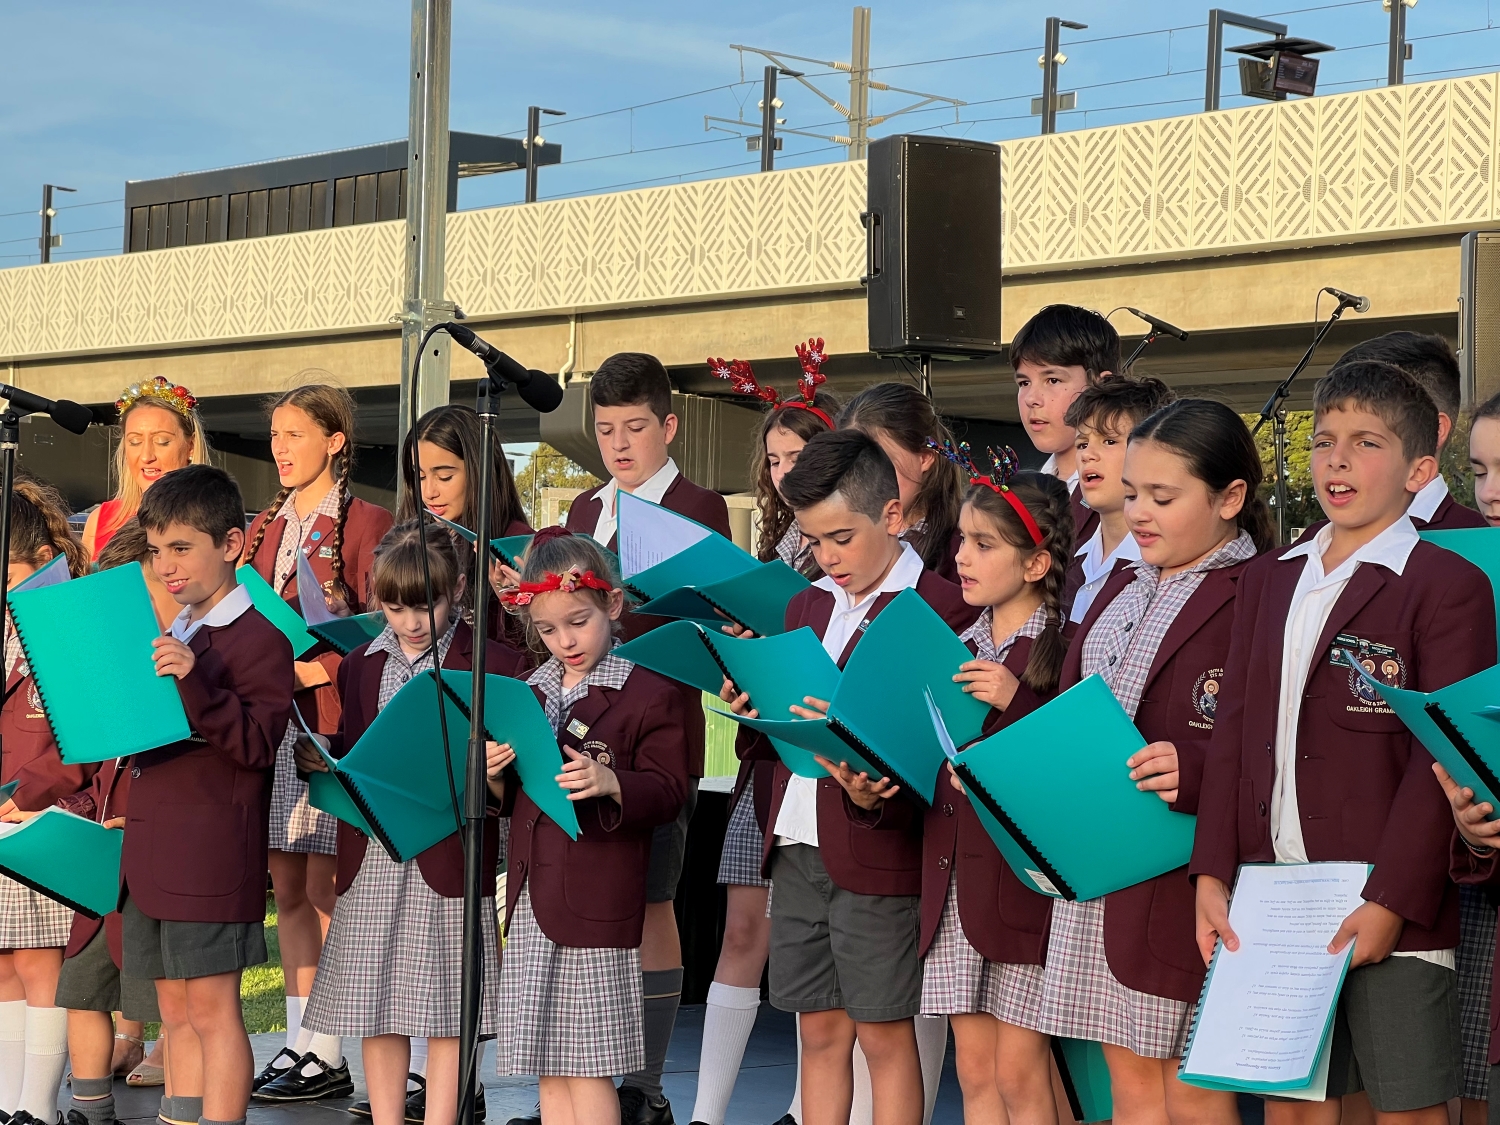 Melbourne: “Carols by Candlelight” dedicated to the memory of Stelios Tsiolas